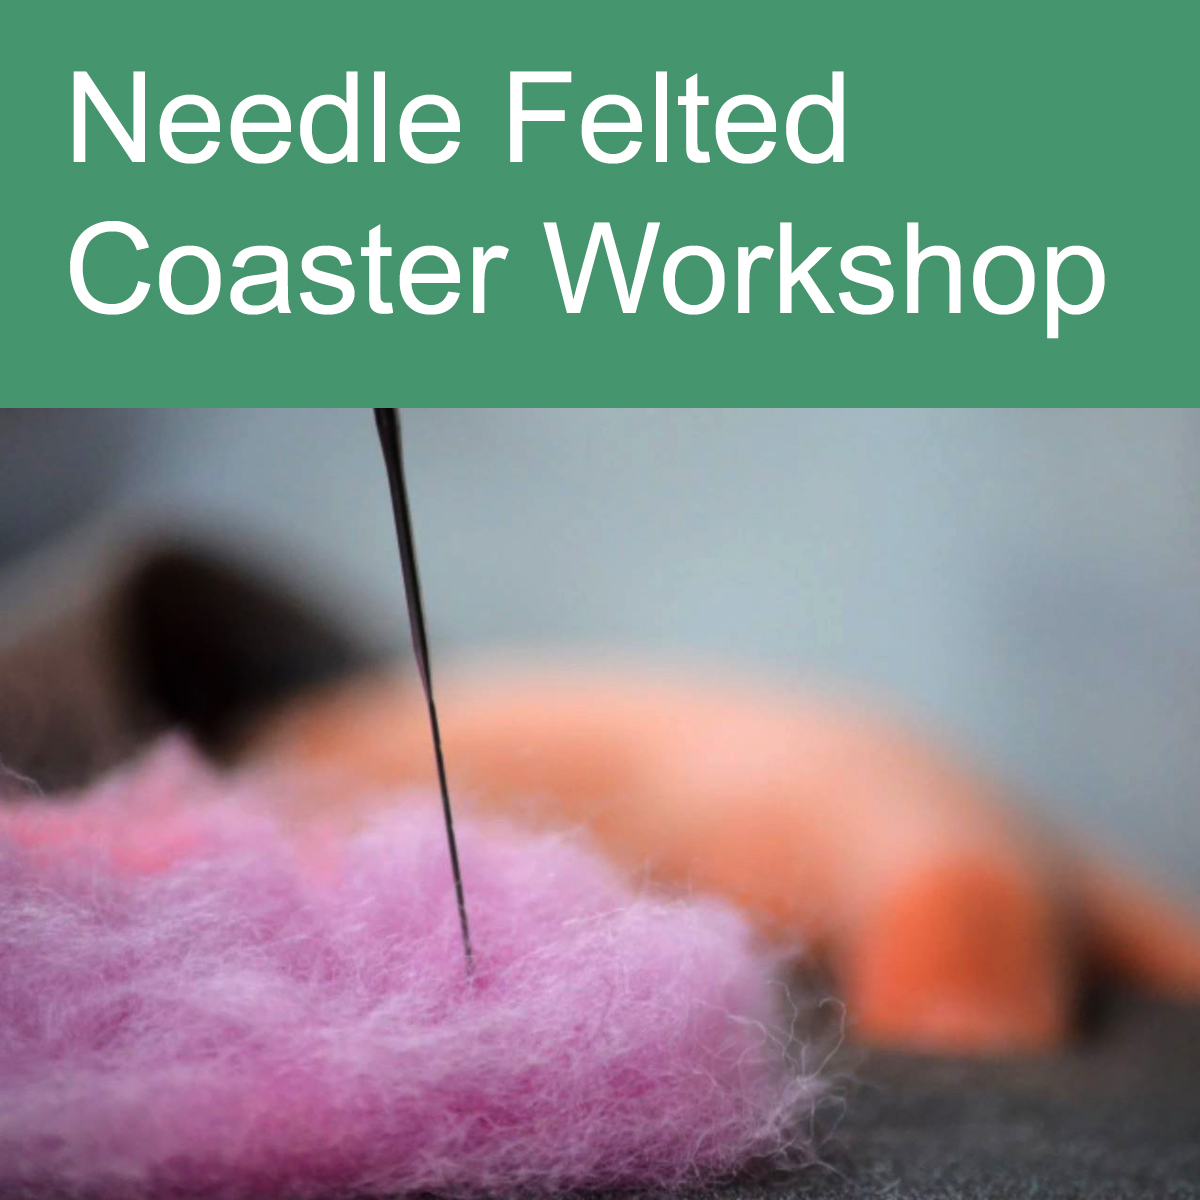 wool being needle felted